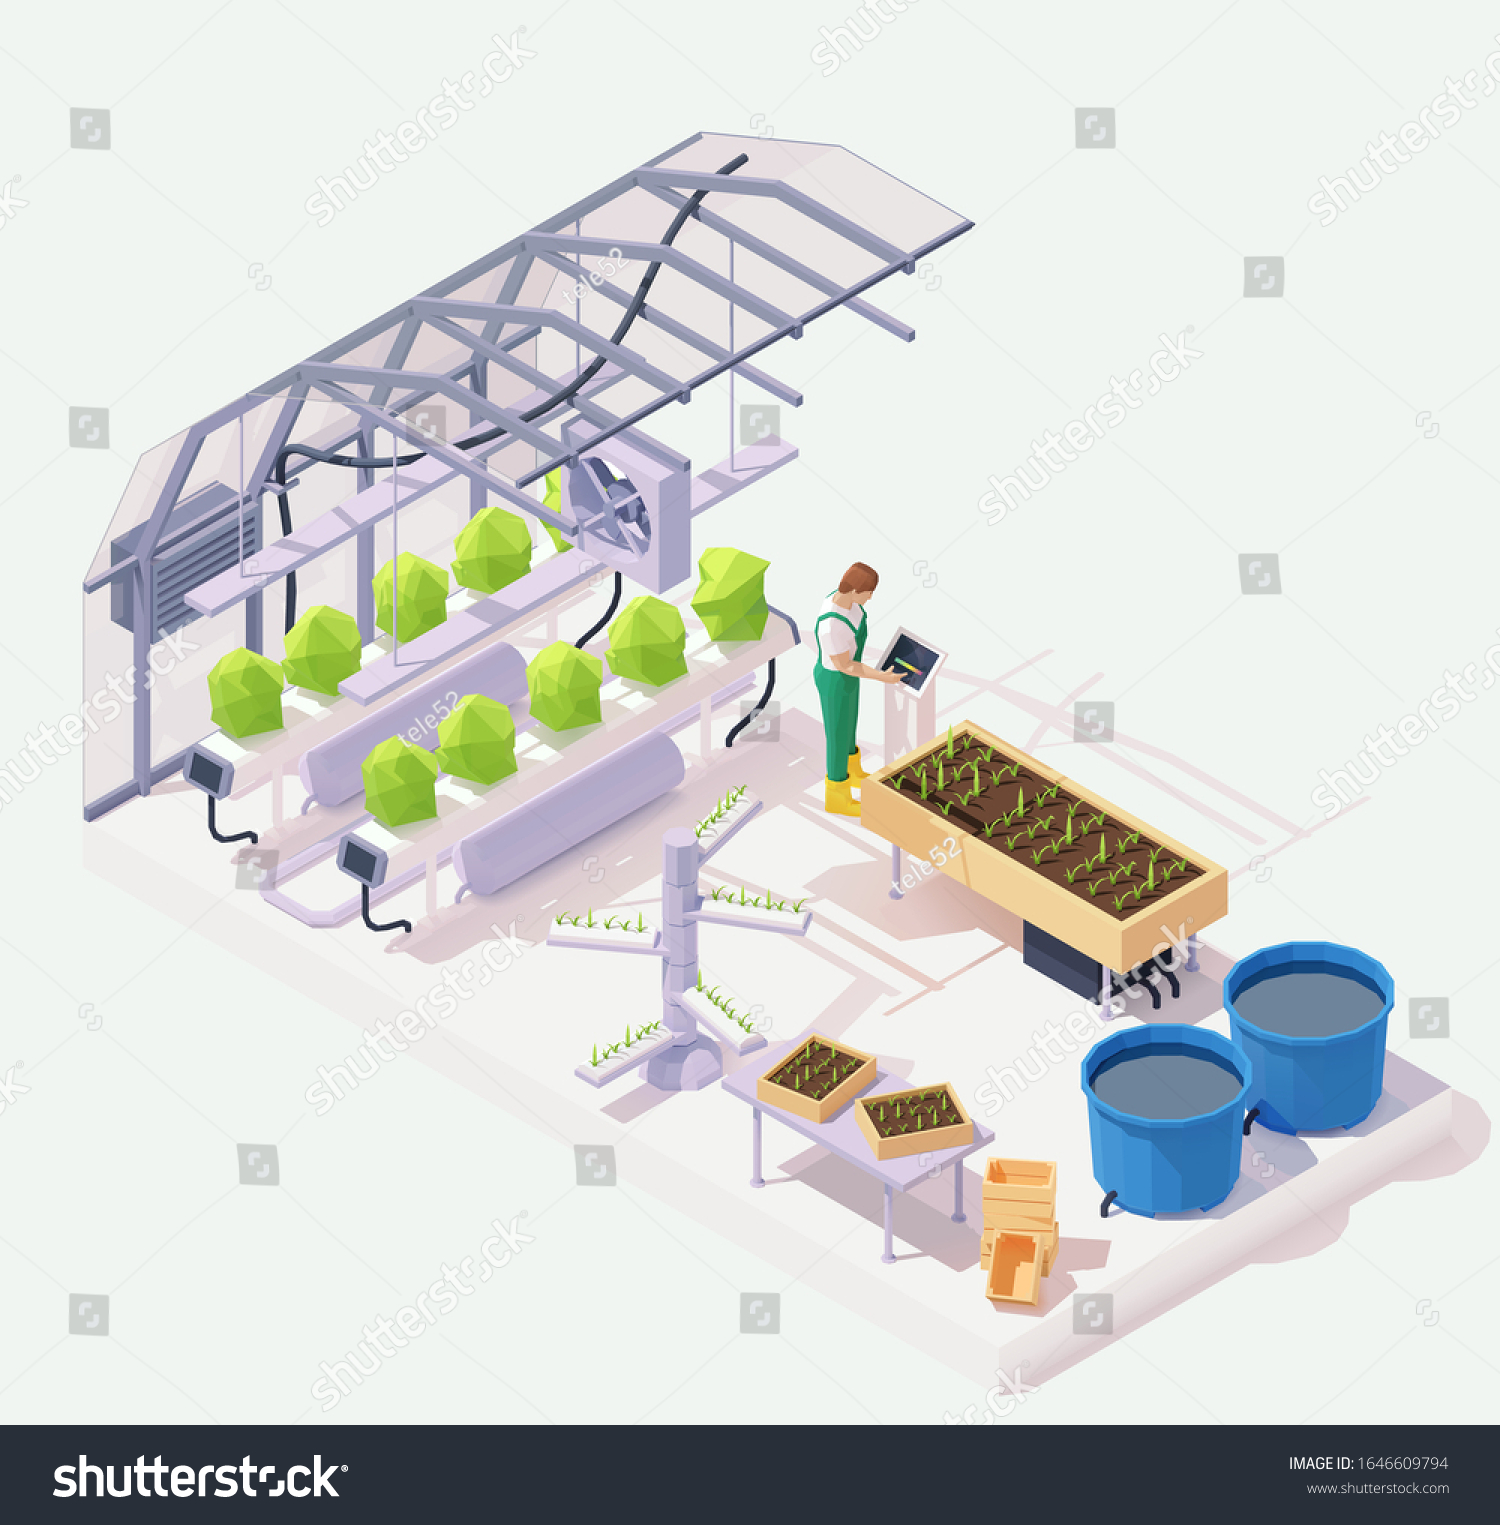 SVG of Vector isometric modern agricultural greenhouse cross-section illustration. Hydroponics and aeroponics process of growing plants, smart garden beds, pond, farmer operating smart greenhouse system svg